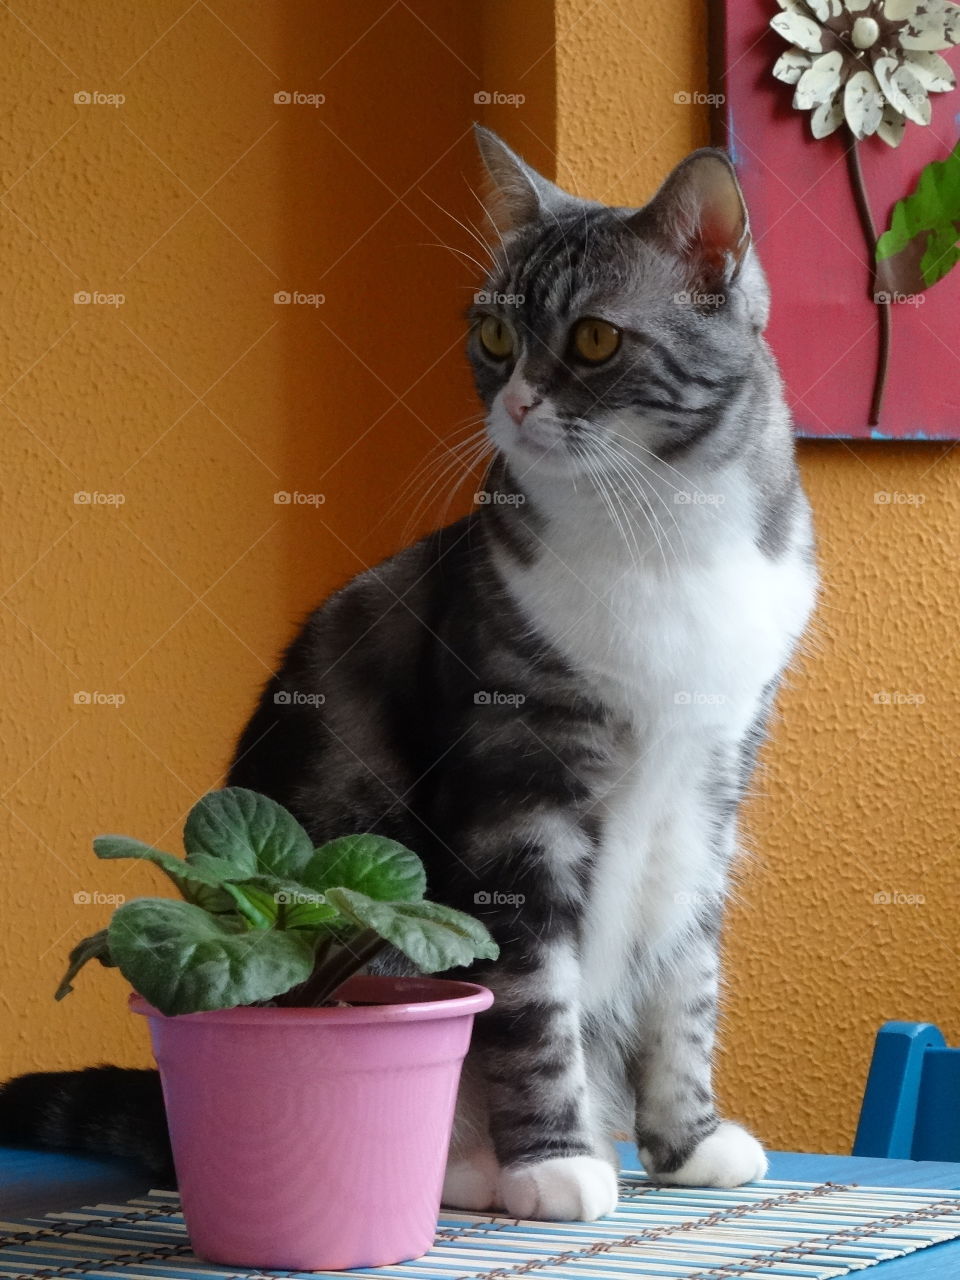 Plant and cat